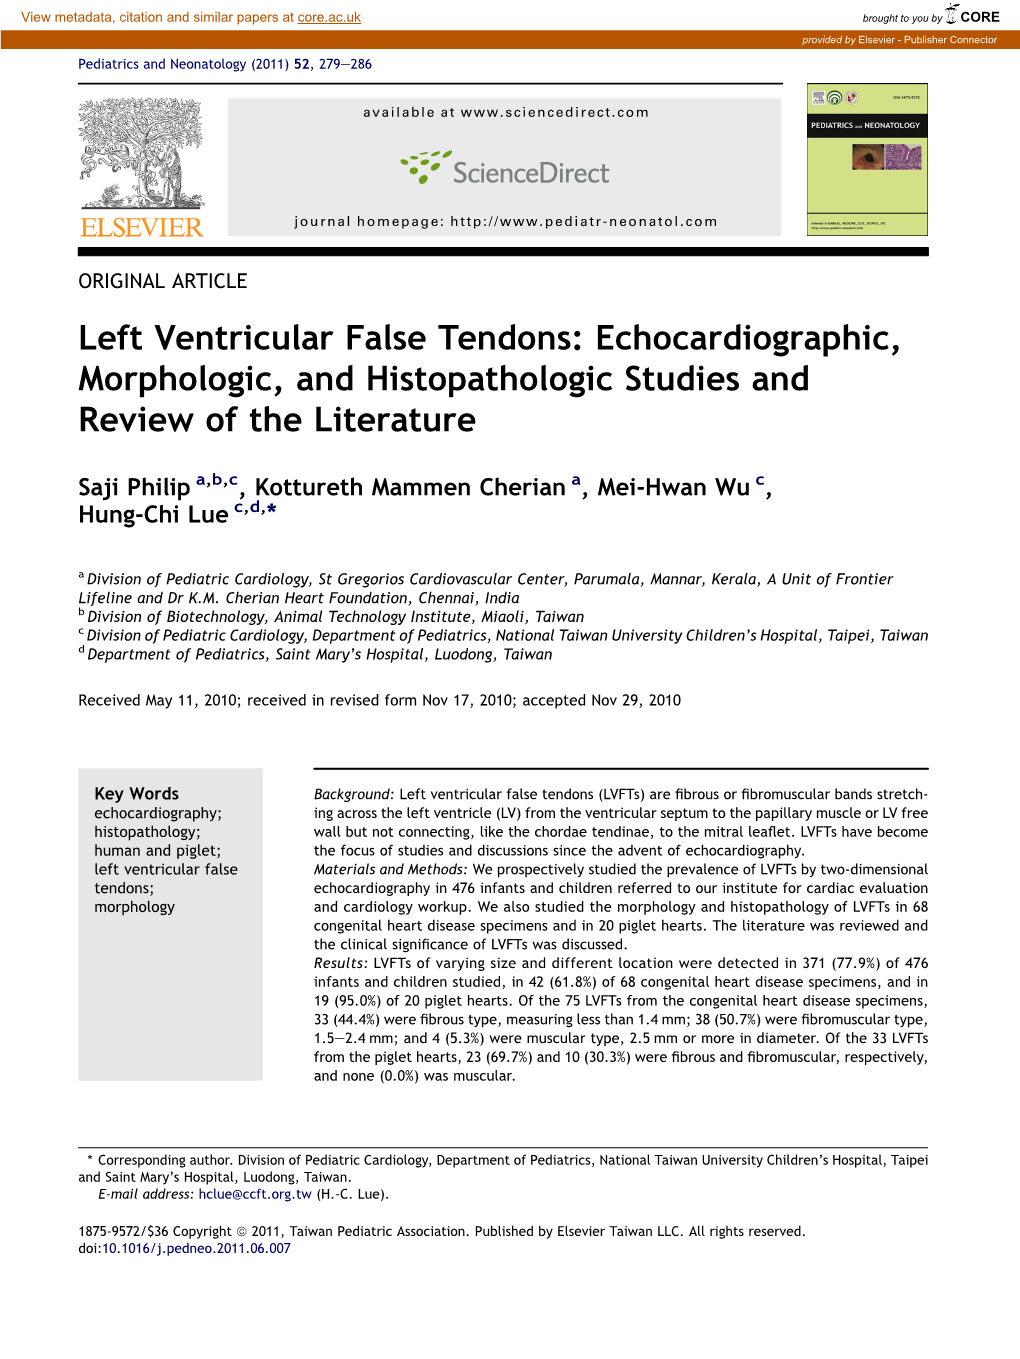 Left Ventricular False Tendons: Echocardiographic, Morphologic, and Histopathologic Studies and Review of the Literature